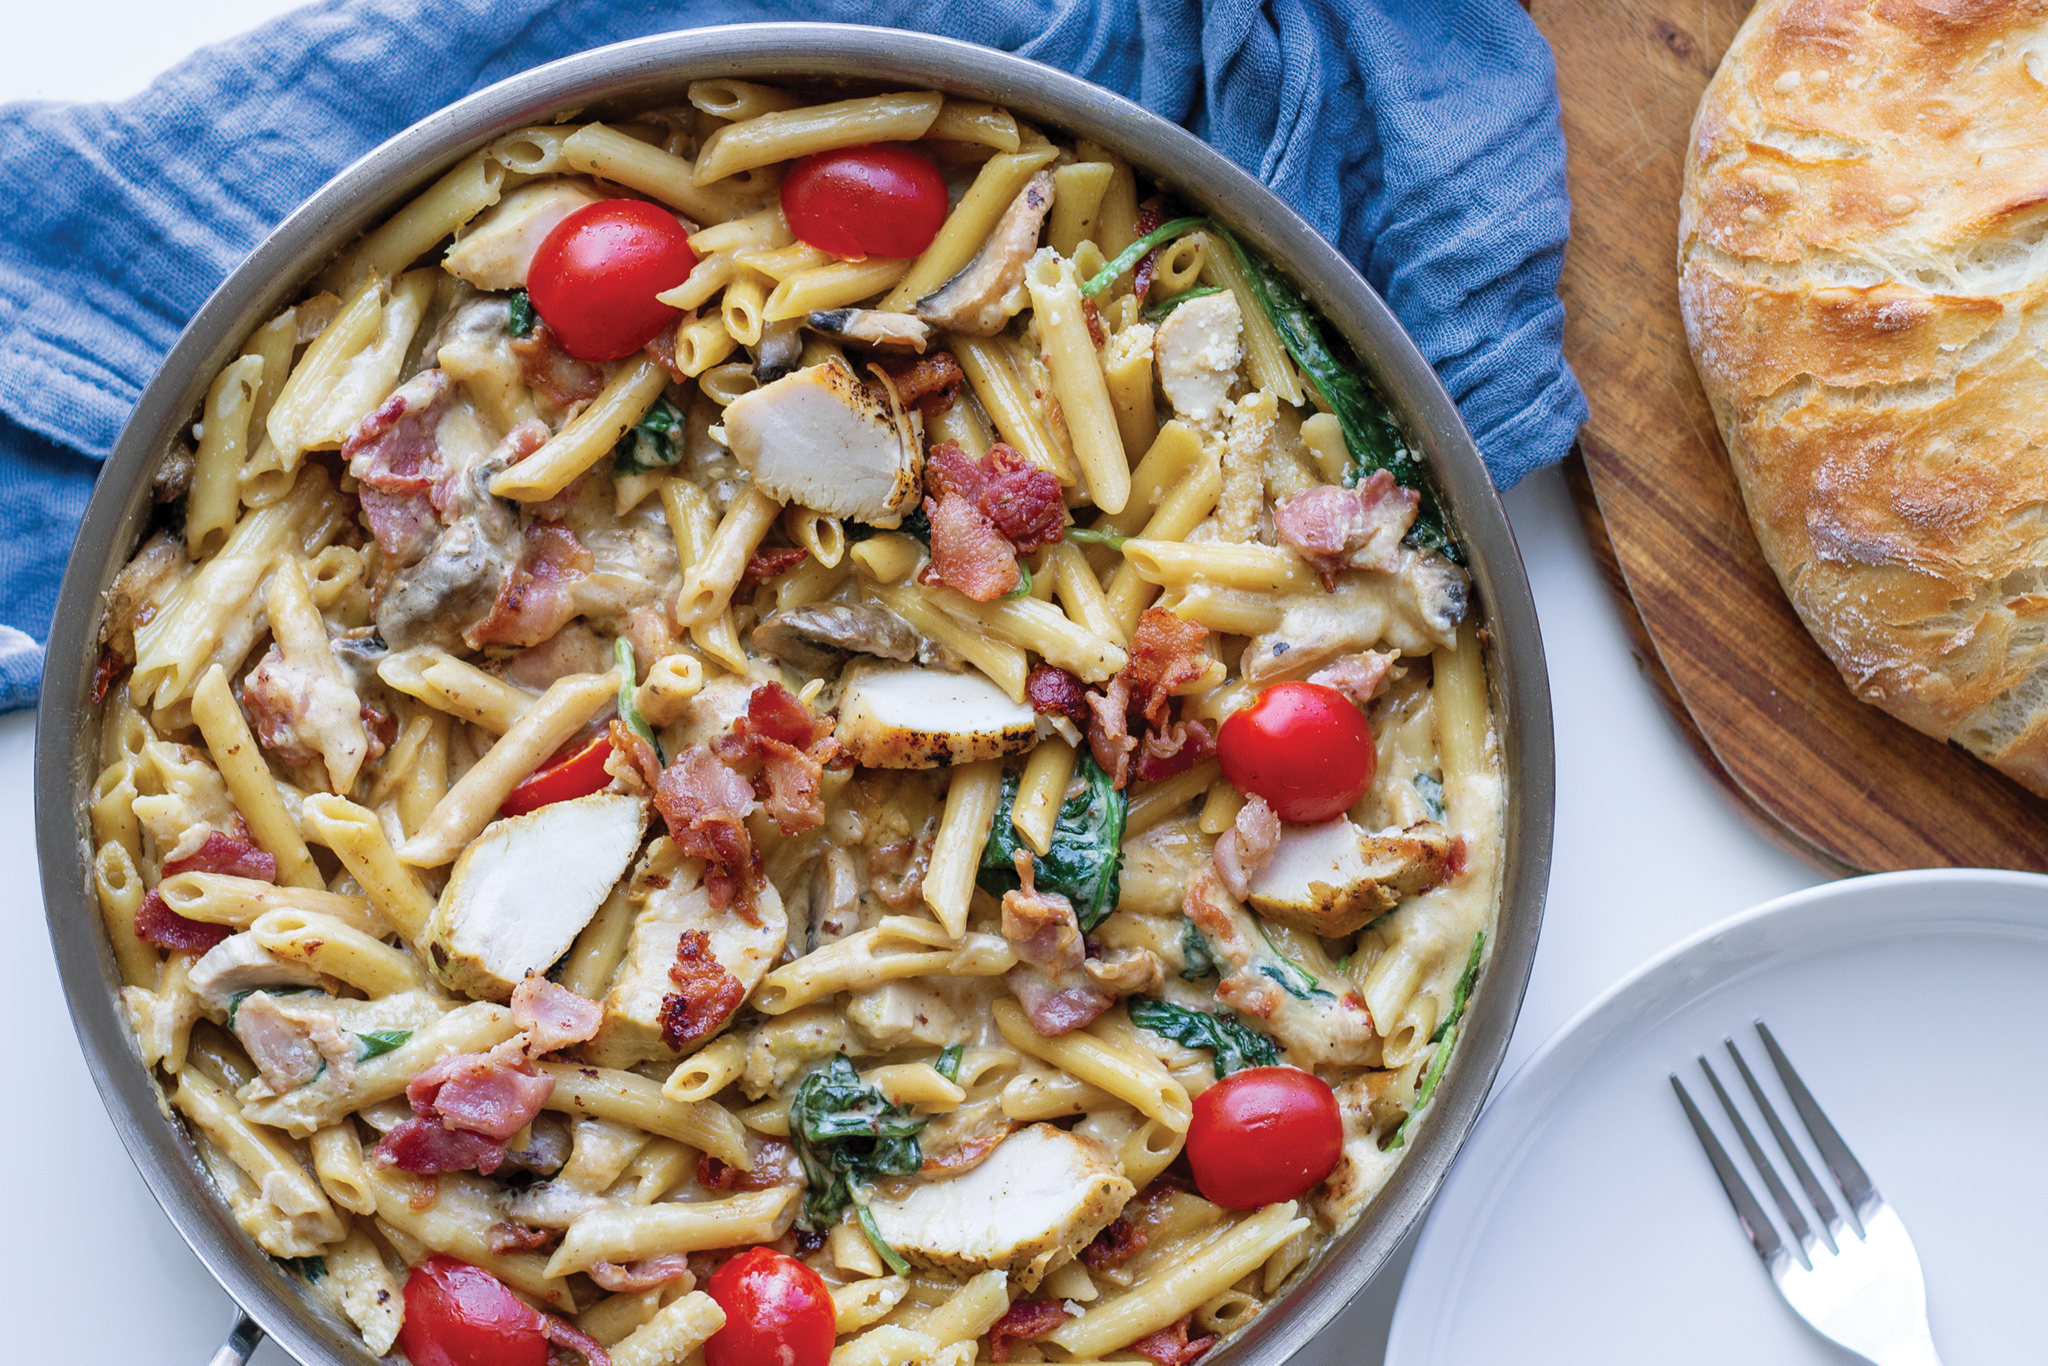 A flatlay of a colourful plate of chicken pasta with red cherry tomatoes and a round loaf of bread on the side.